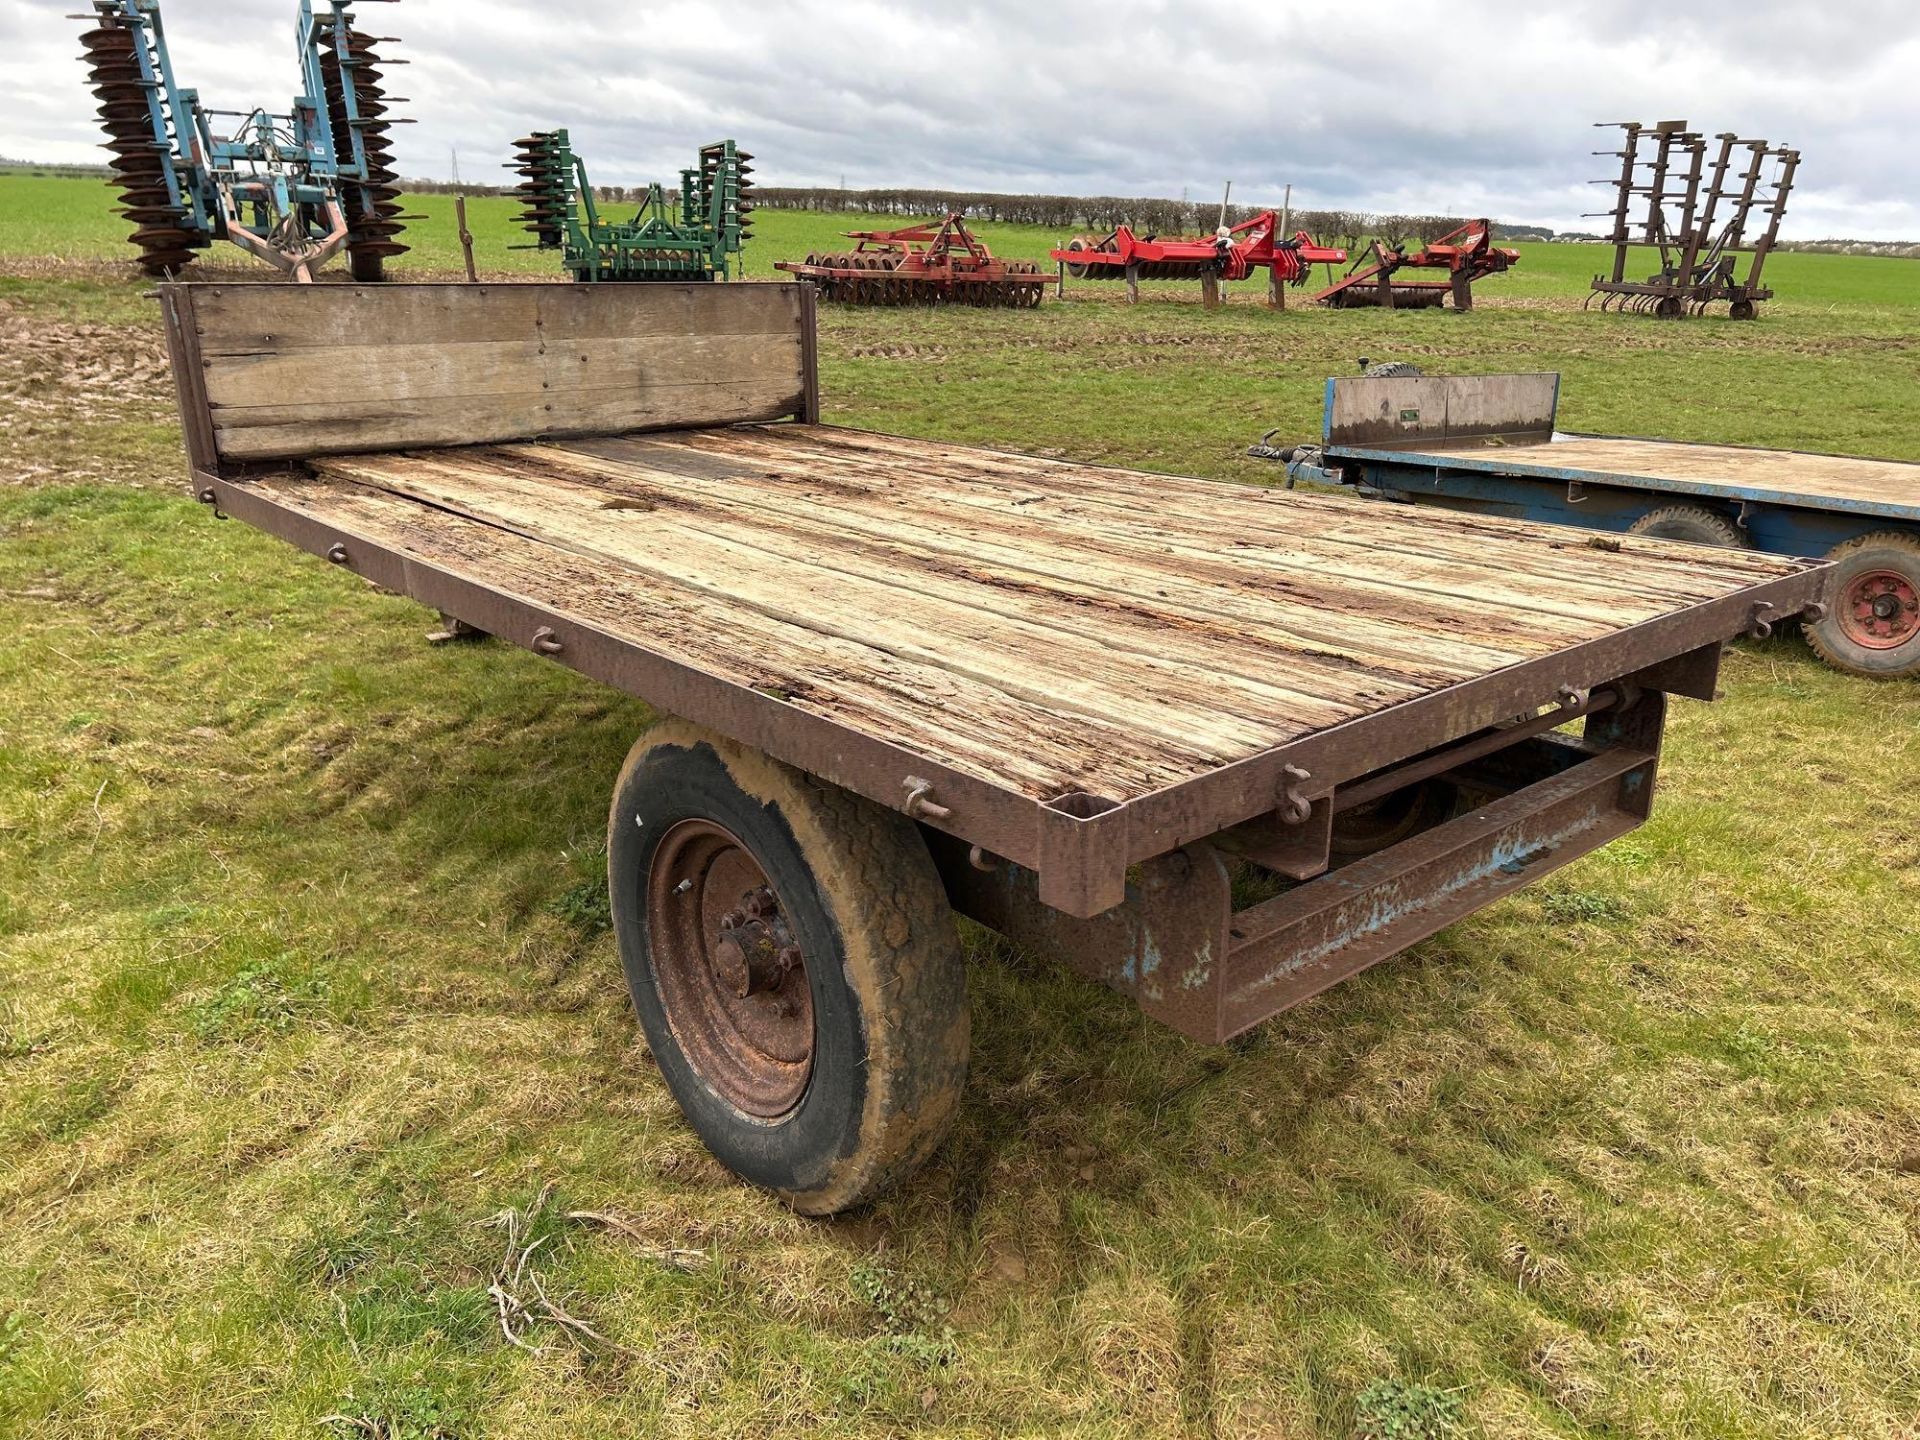 Single axle flat bed trailer with wooden floor - Image 5 of 6